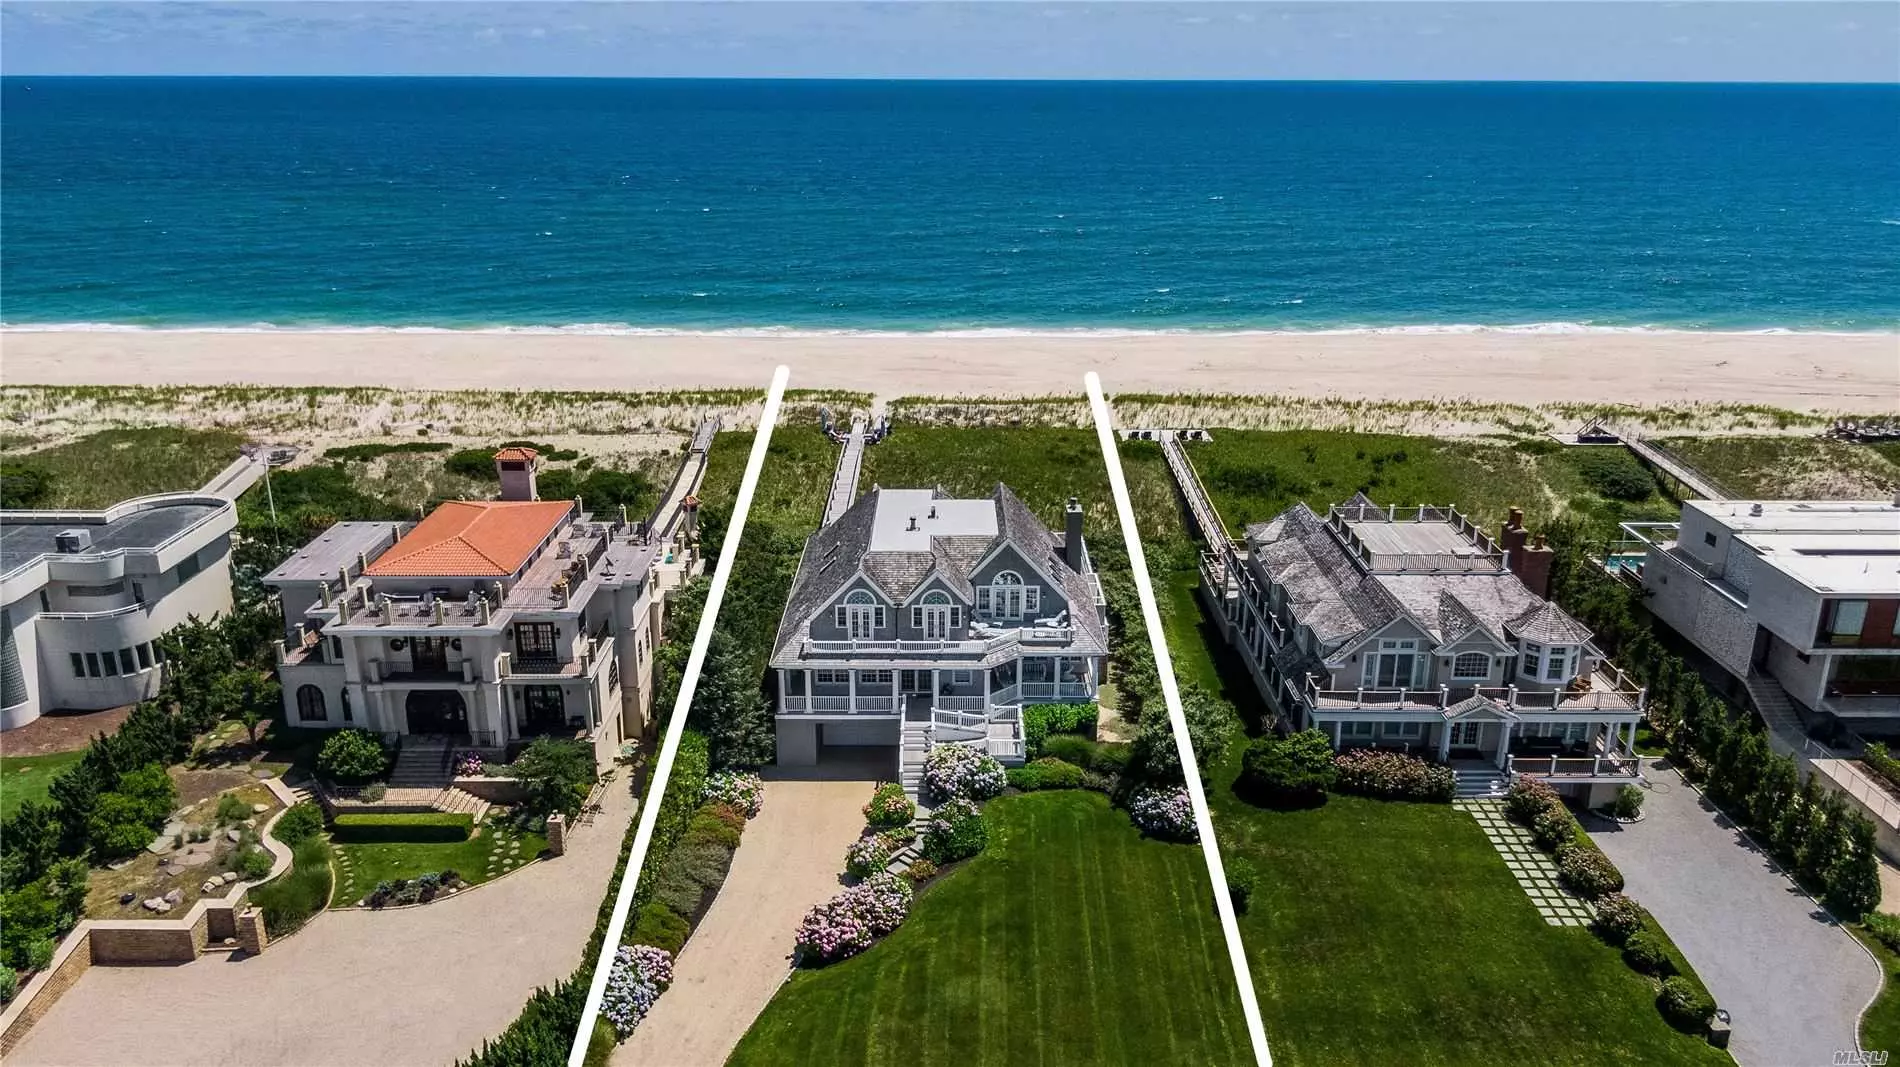 This Extraordinary Oceanfront Home Has It All. Set on 1.4 +/- Acres, Across From Preserved Wetlands, And With 102 Feet Of Ocean Frontage, This Shingled 6 Bedroom Home Combines Ocean And Bay Living. The Unobstructed Views Of The Ocean & Bay Provide Views From Every Room And Picturesque Sunsets. The Open-Concept Great Room, Gourmet Kitchen, Giant Deck With Sparkling Unite Pool, And Expansive Dune Deck, Makes This The Perfect Hamptons Retreat For You & Yours. This Is Not To Be Missed!